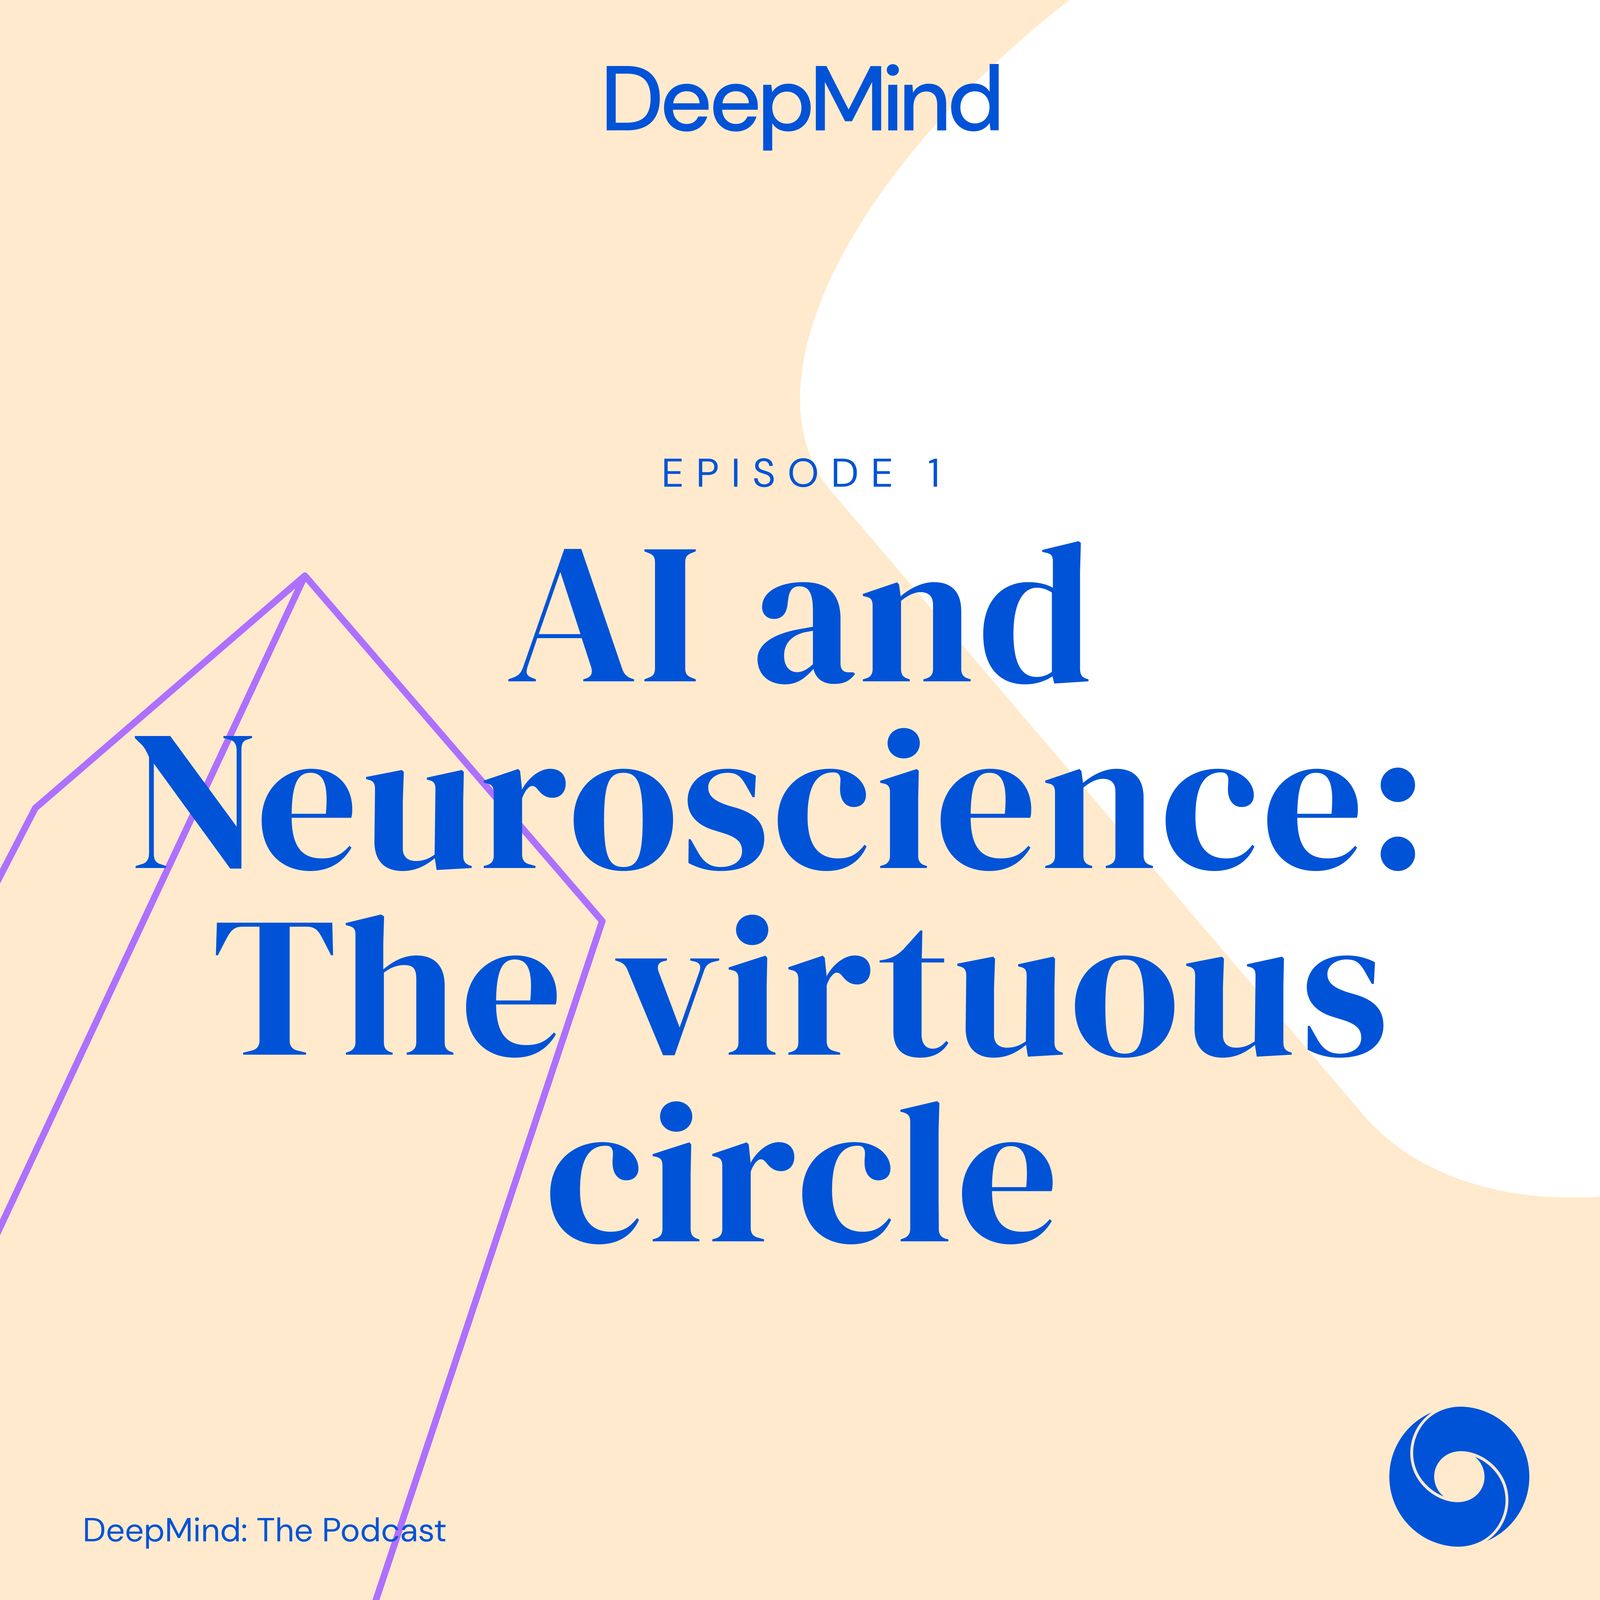 S1 Ep1: AI and Neuroscience: The virtuous circle